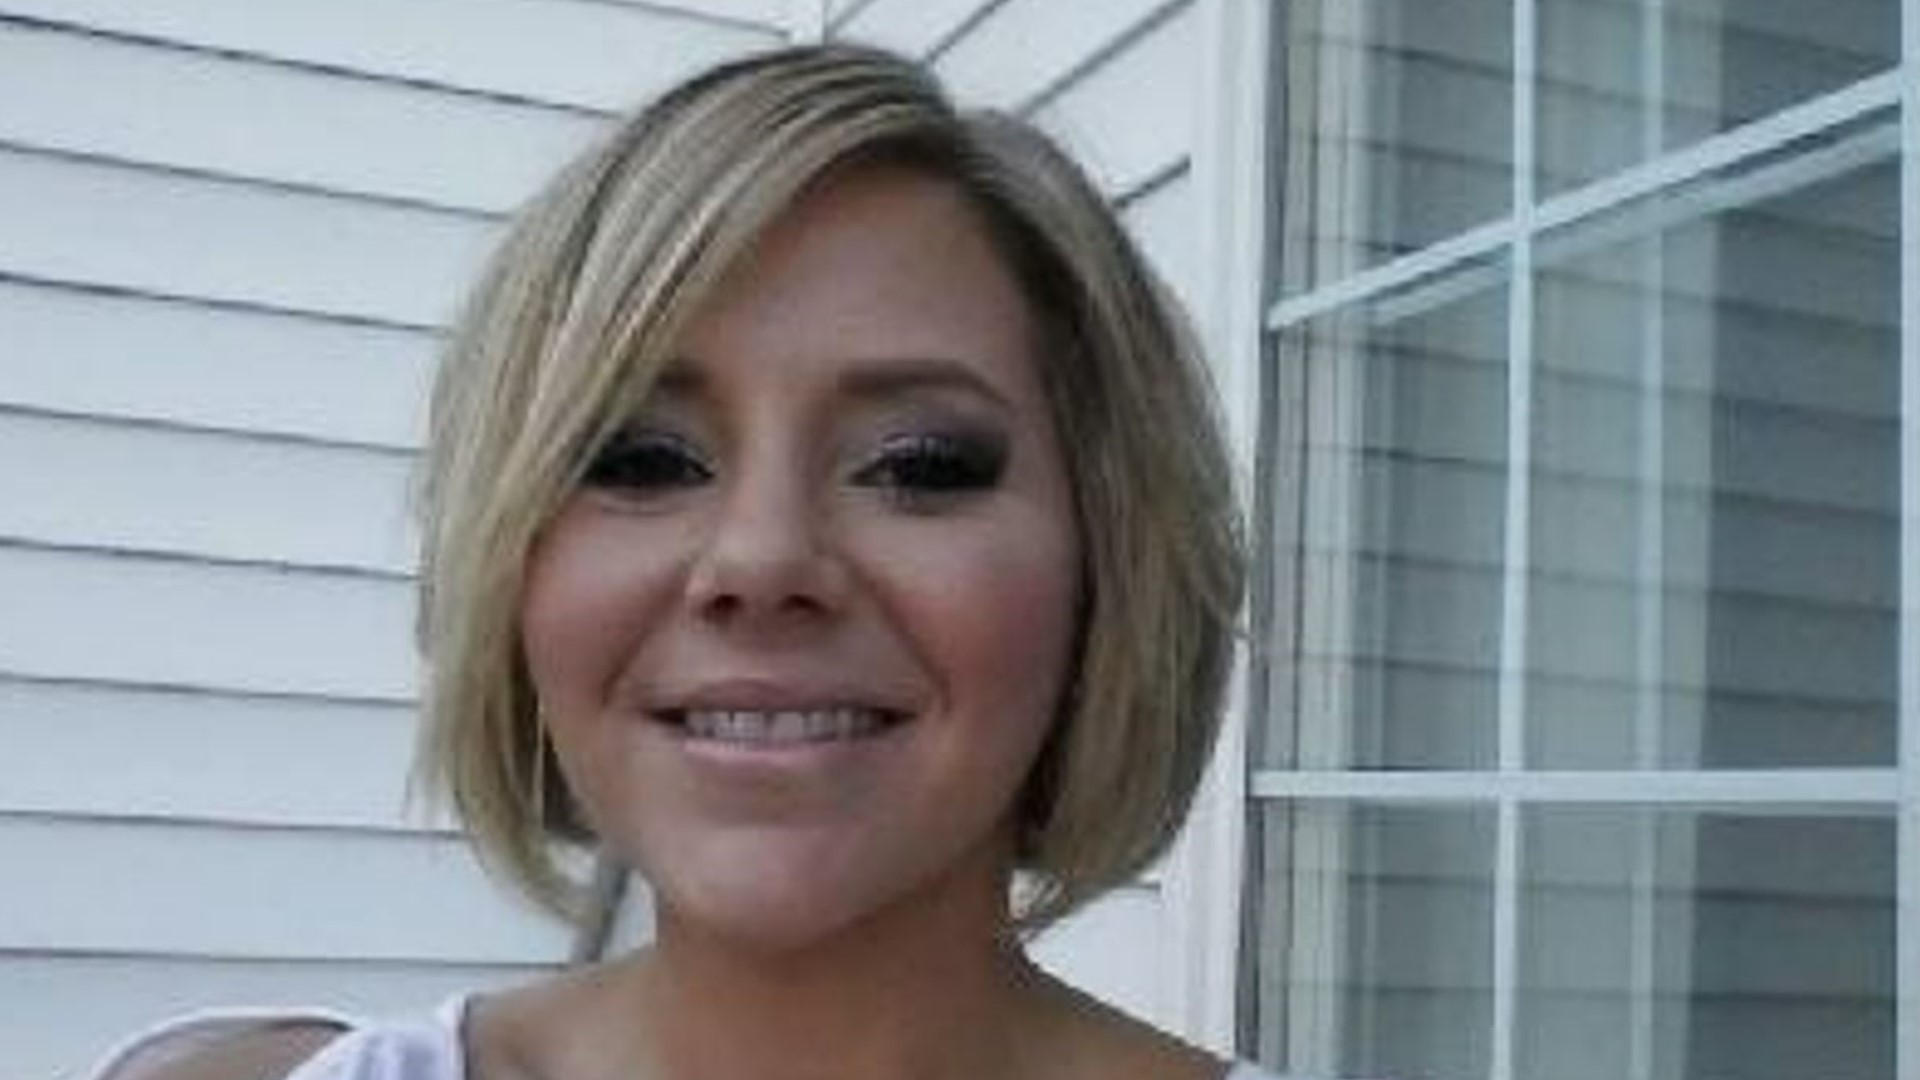 Alexis Wolfe, 37, was trying to cross Morse Road this weekend when a vehicle struck her and then kept driving, according to the Columbus Division of Police.